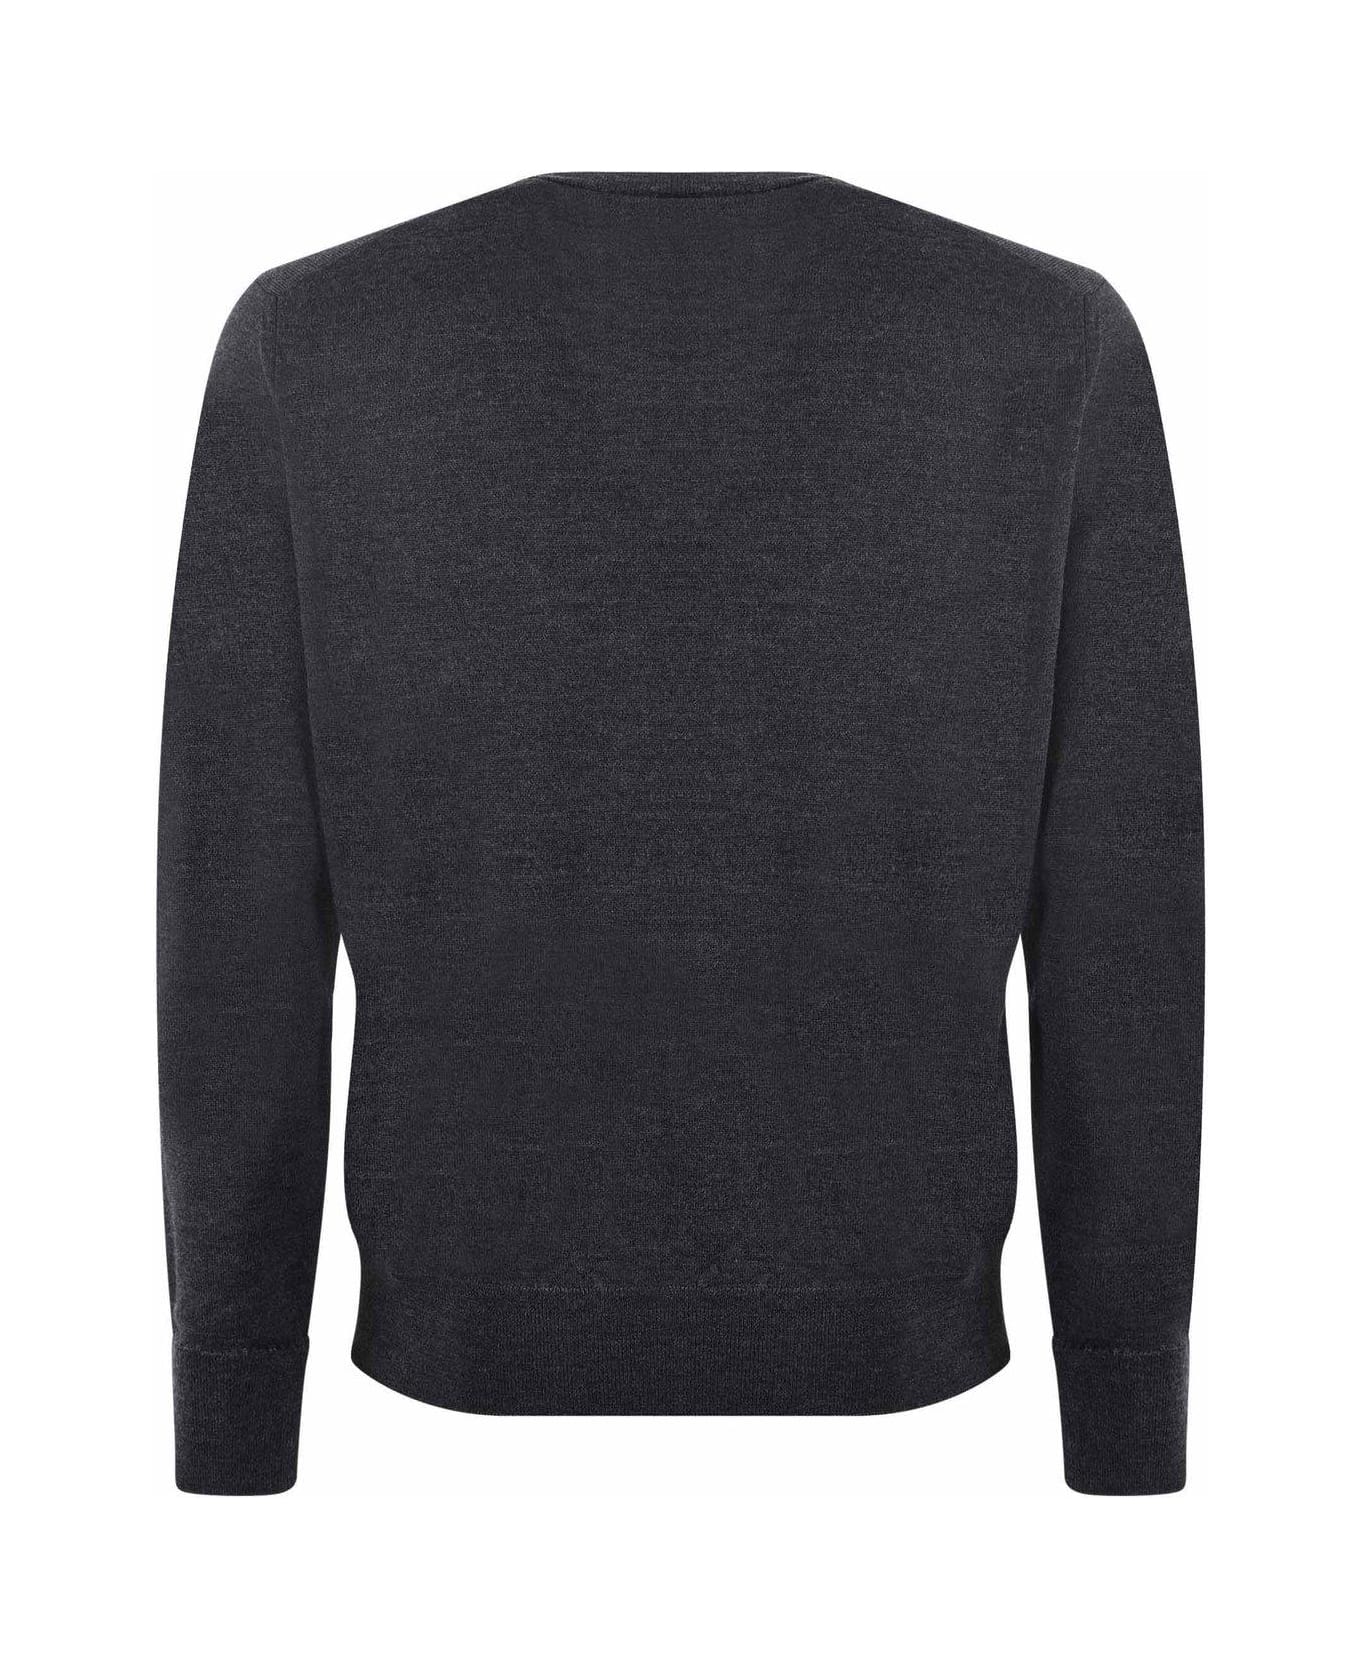 Etro Logo Embroidered Crewneck Knitted Jumper